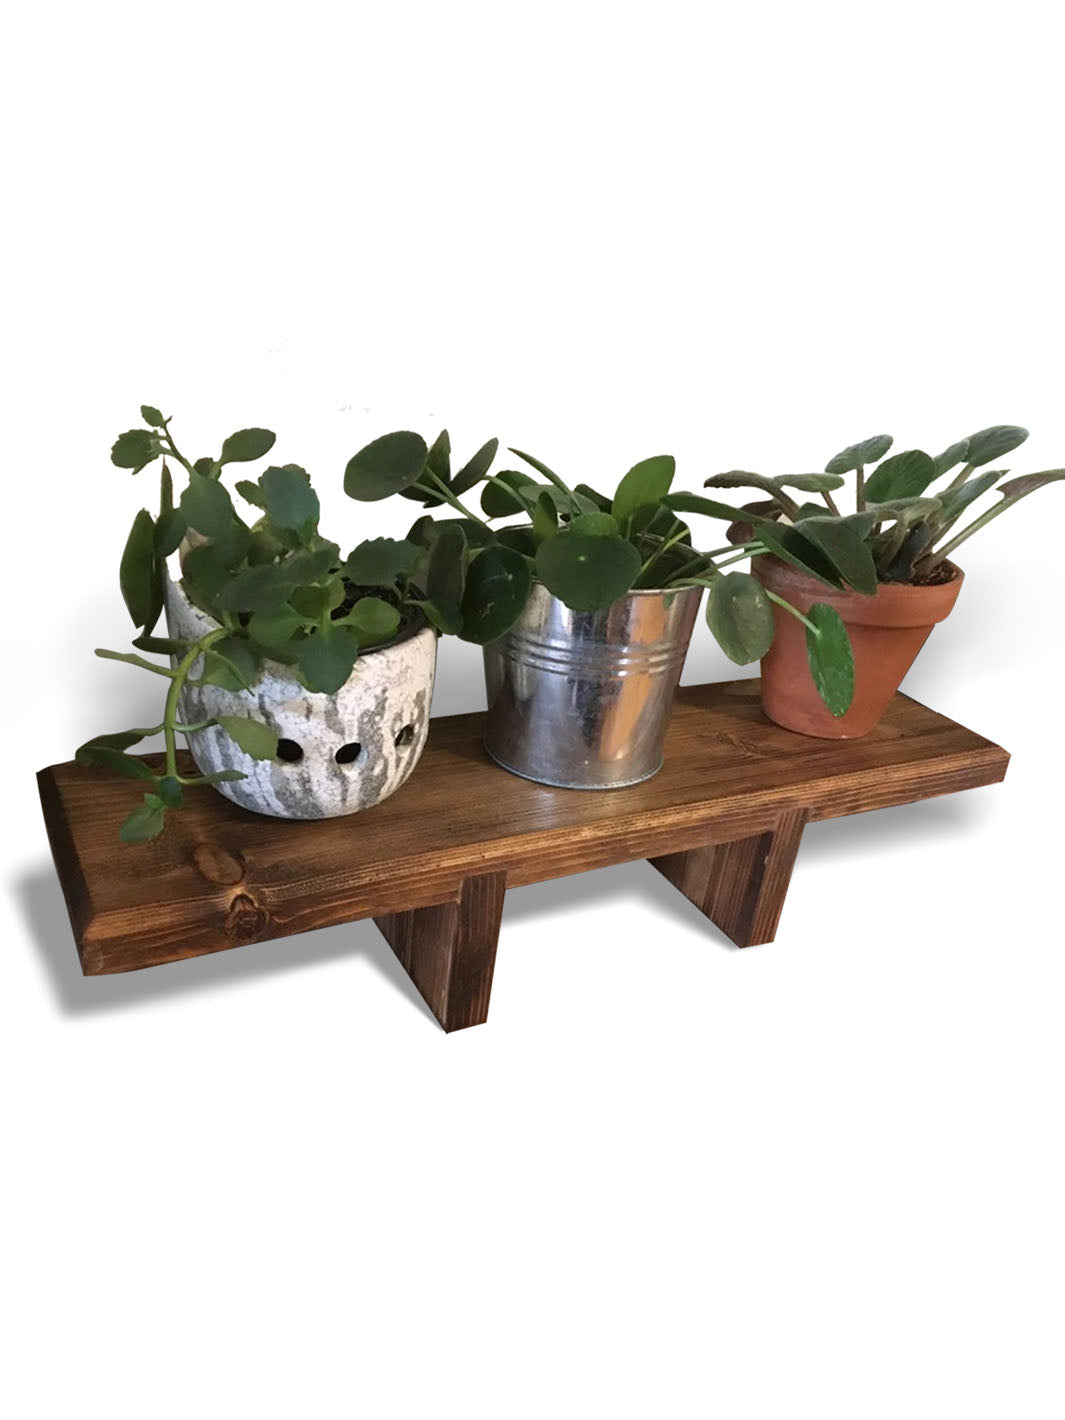 Handcrafted Barnboard Rustic Wooden Plant Riser Stand FTN Plant Stands FTN0044